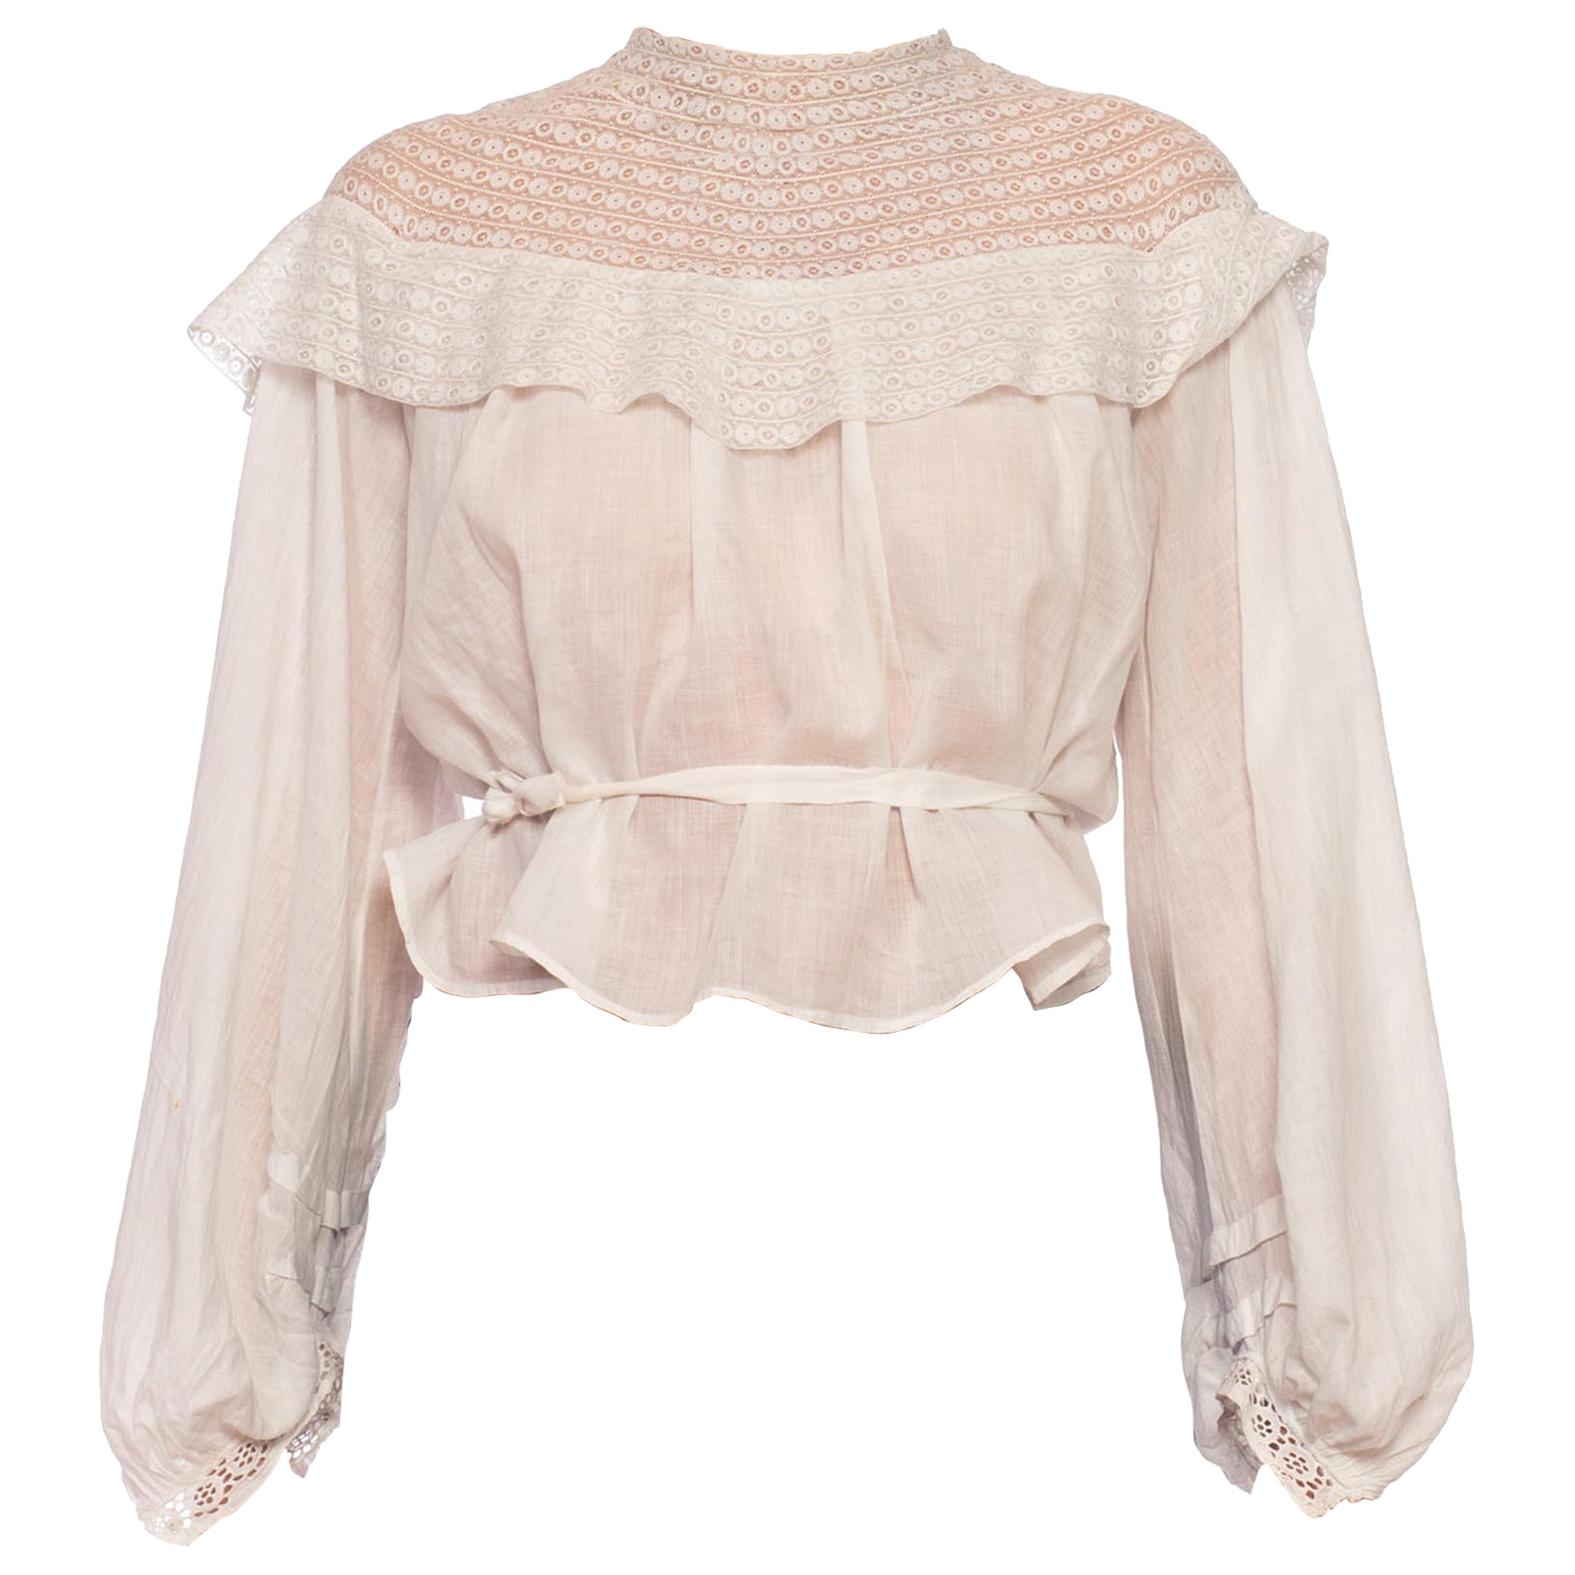 White Cotton Voile & Tape Lace Swan Neck Blouse With Bishop Sleeves